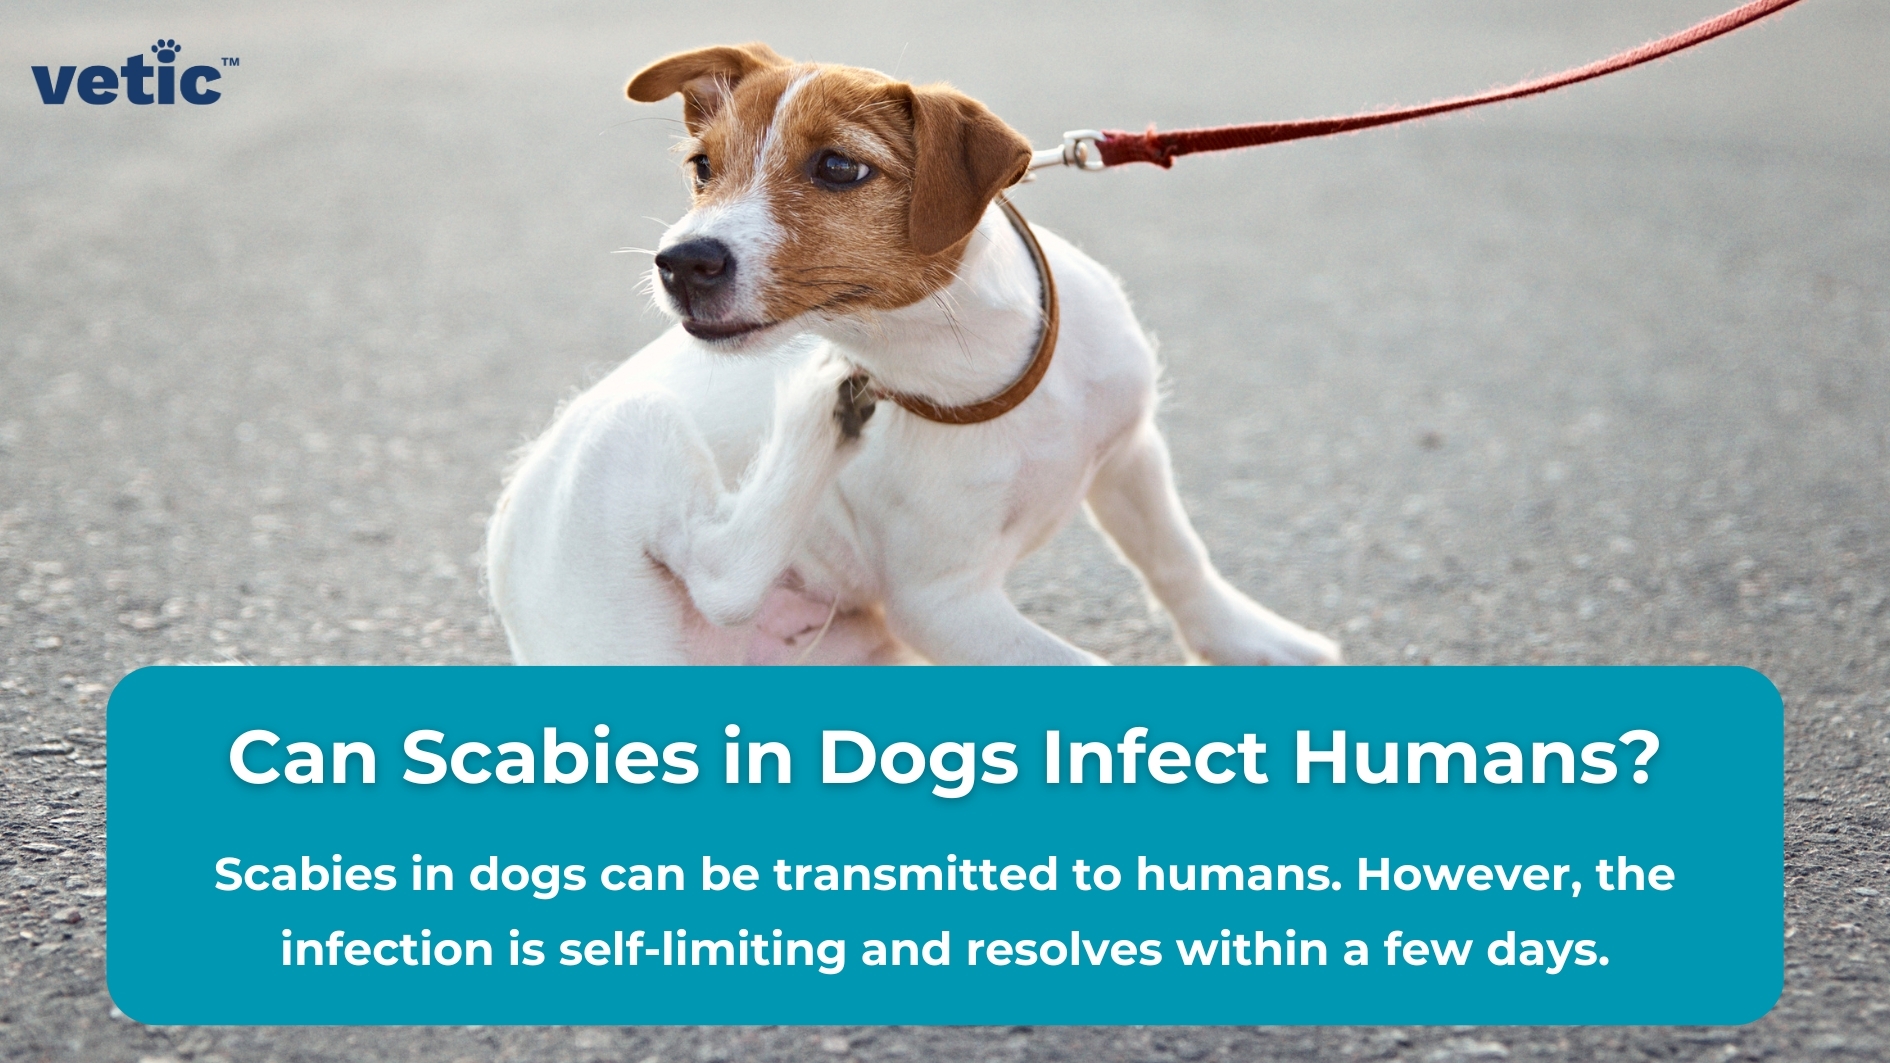 A dog on a leash with informational text about scabies in dogs and its potential transmission to humans. The dog appears to be outdoors, standing on an asphalt surface. In the upper left corner, there’s the logo “vetic” in white letters against a dark blue background. A large blue box containing white text poses the question, “Can Scabies in Dogs Infect Humans?” Below this question, additional information explains that while scabies can be transmitted from dogs to humans, the infection is self-limiting and typically resolves within a few days.